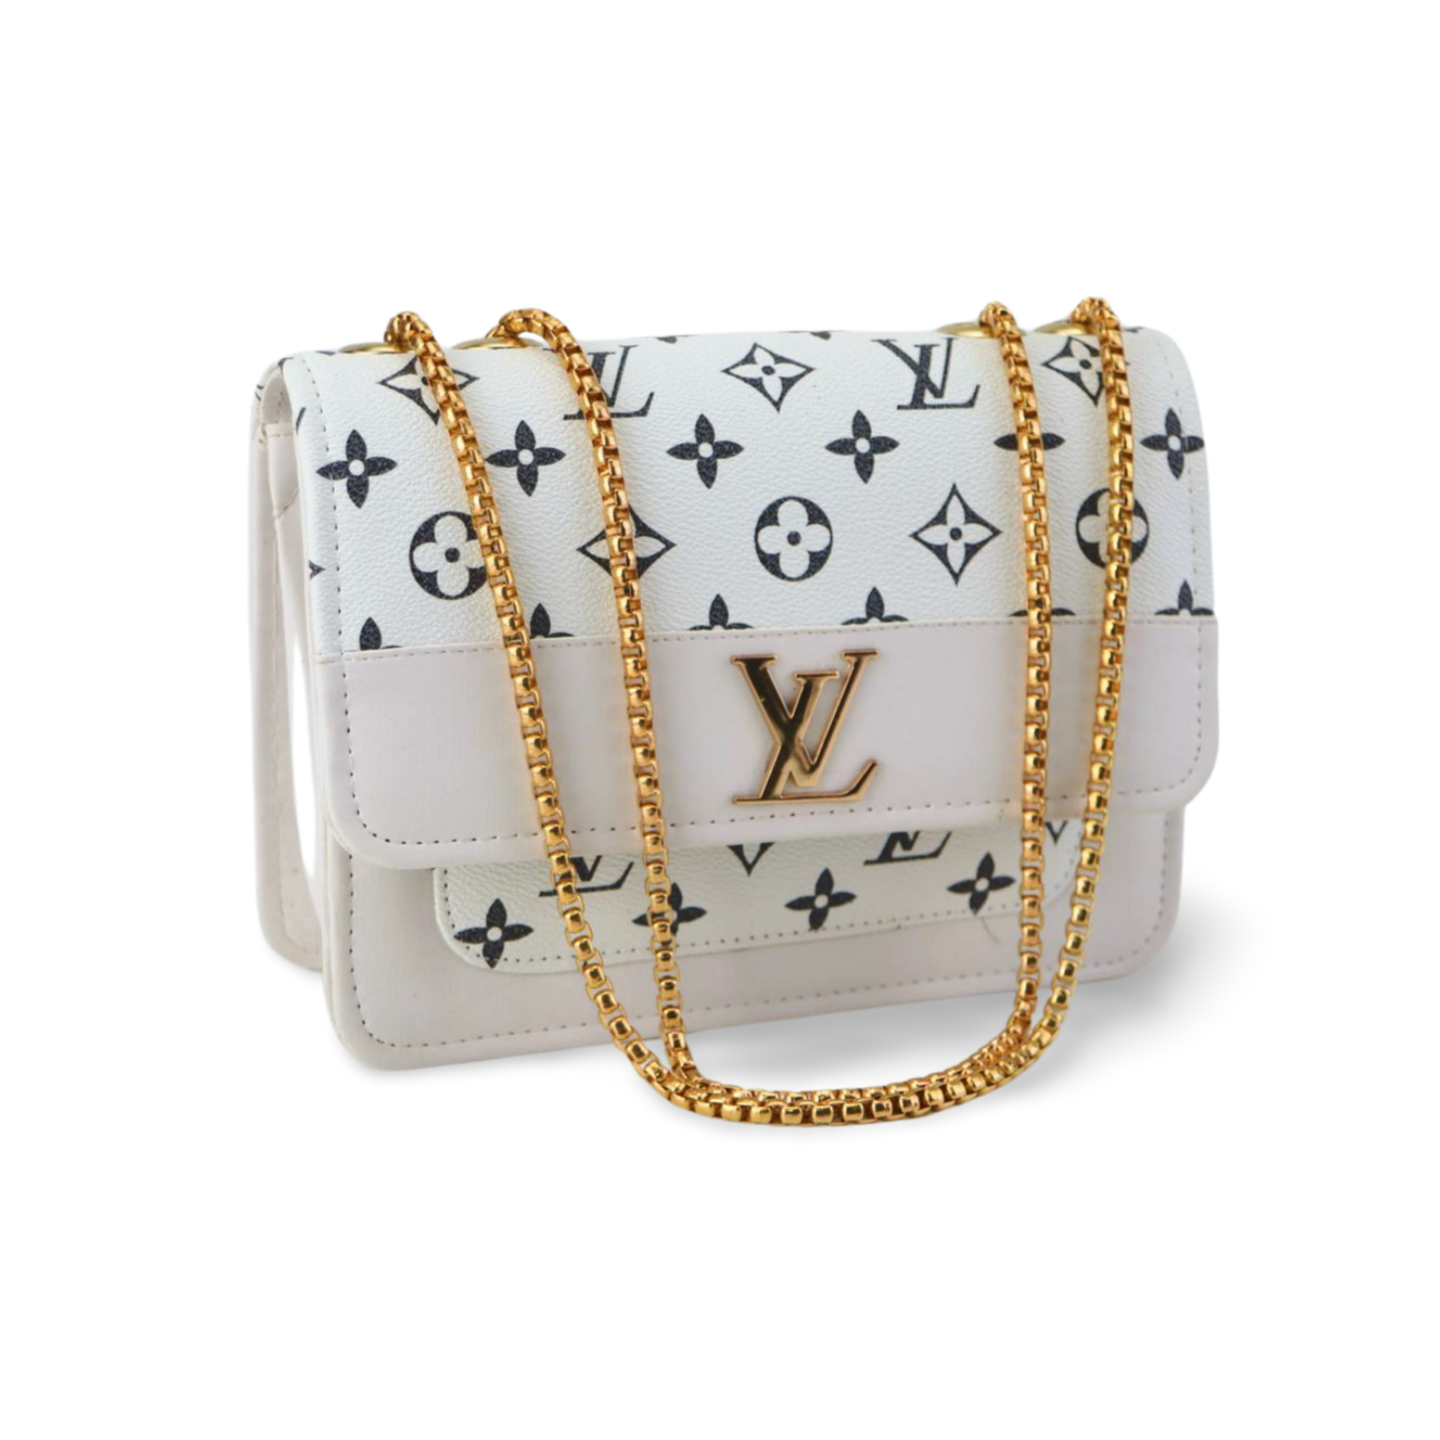 Womens Crossbody Bag with Gold Chain - Stylish and Versatile Purse for Women